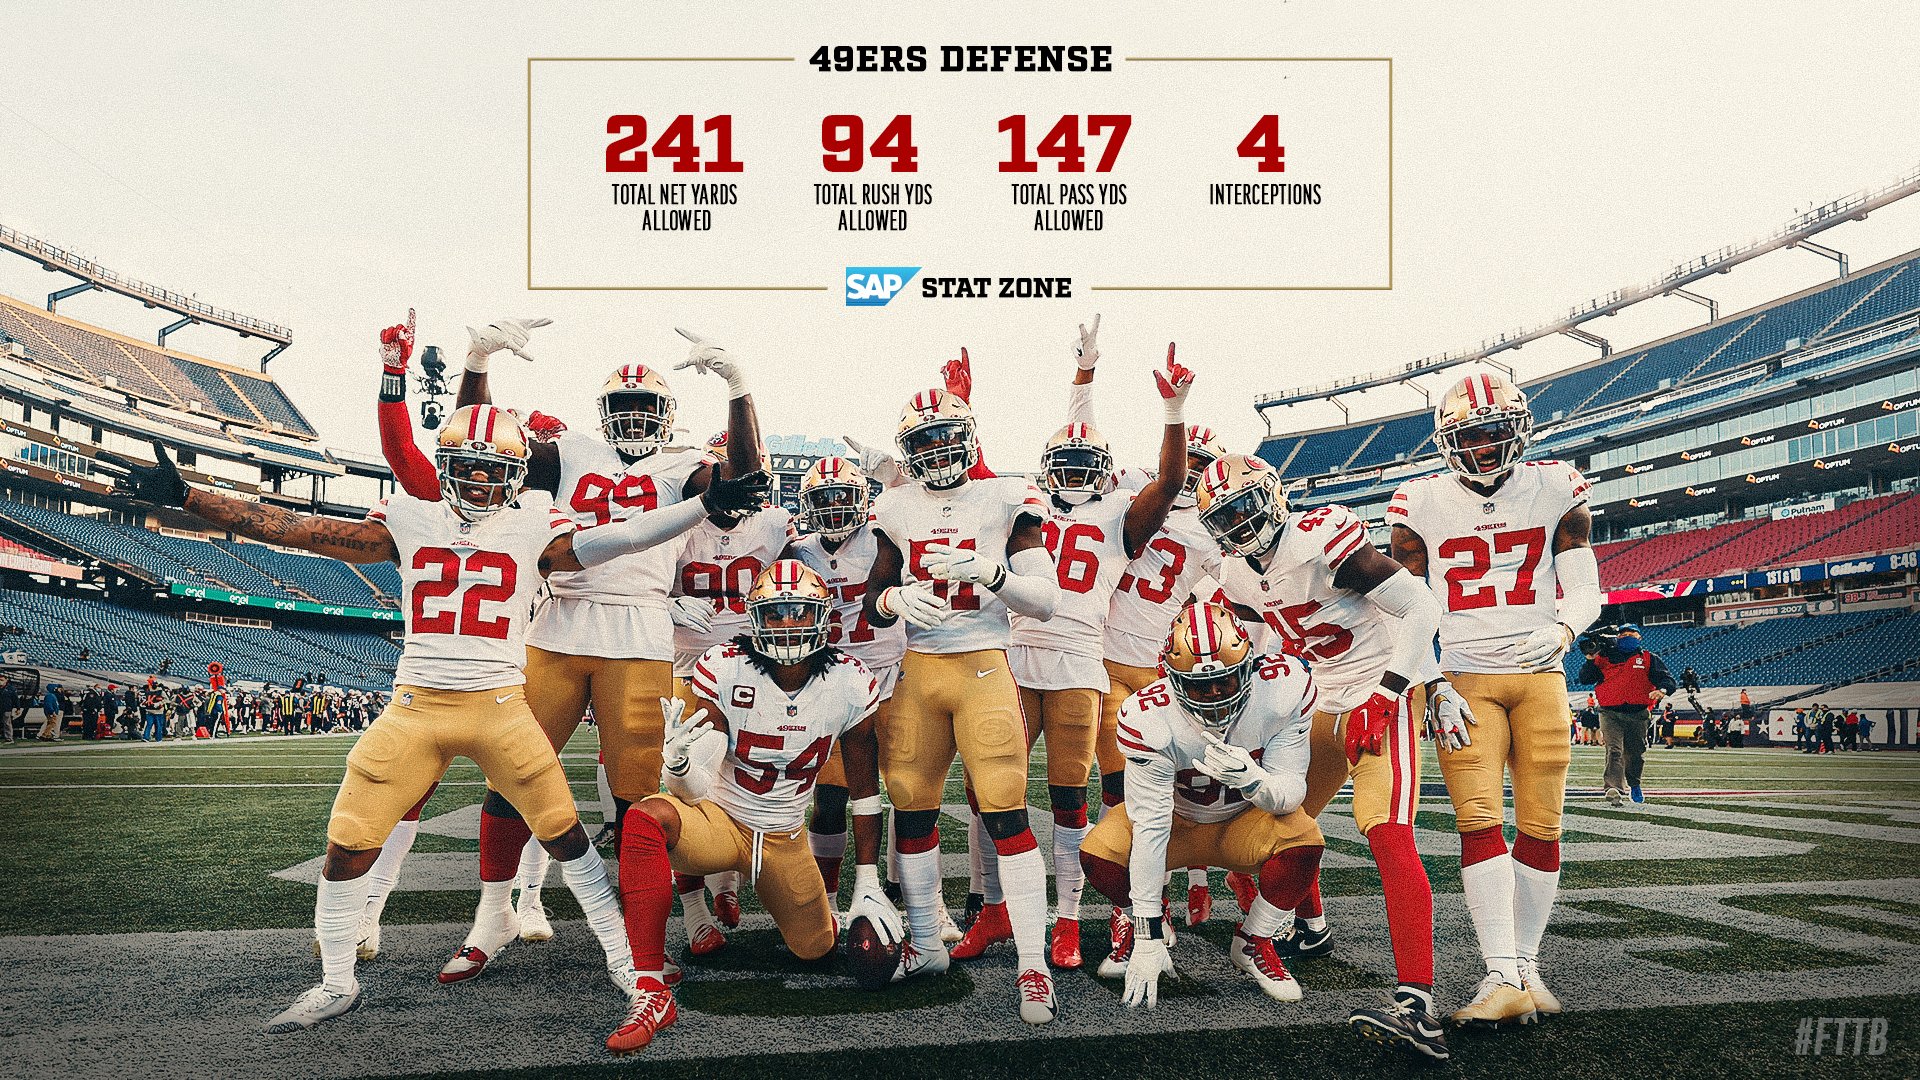 San Francisco 49ers on X: 'The defense balled out today